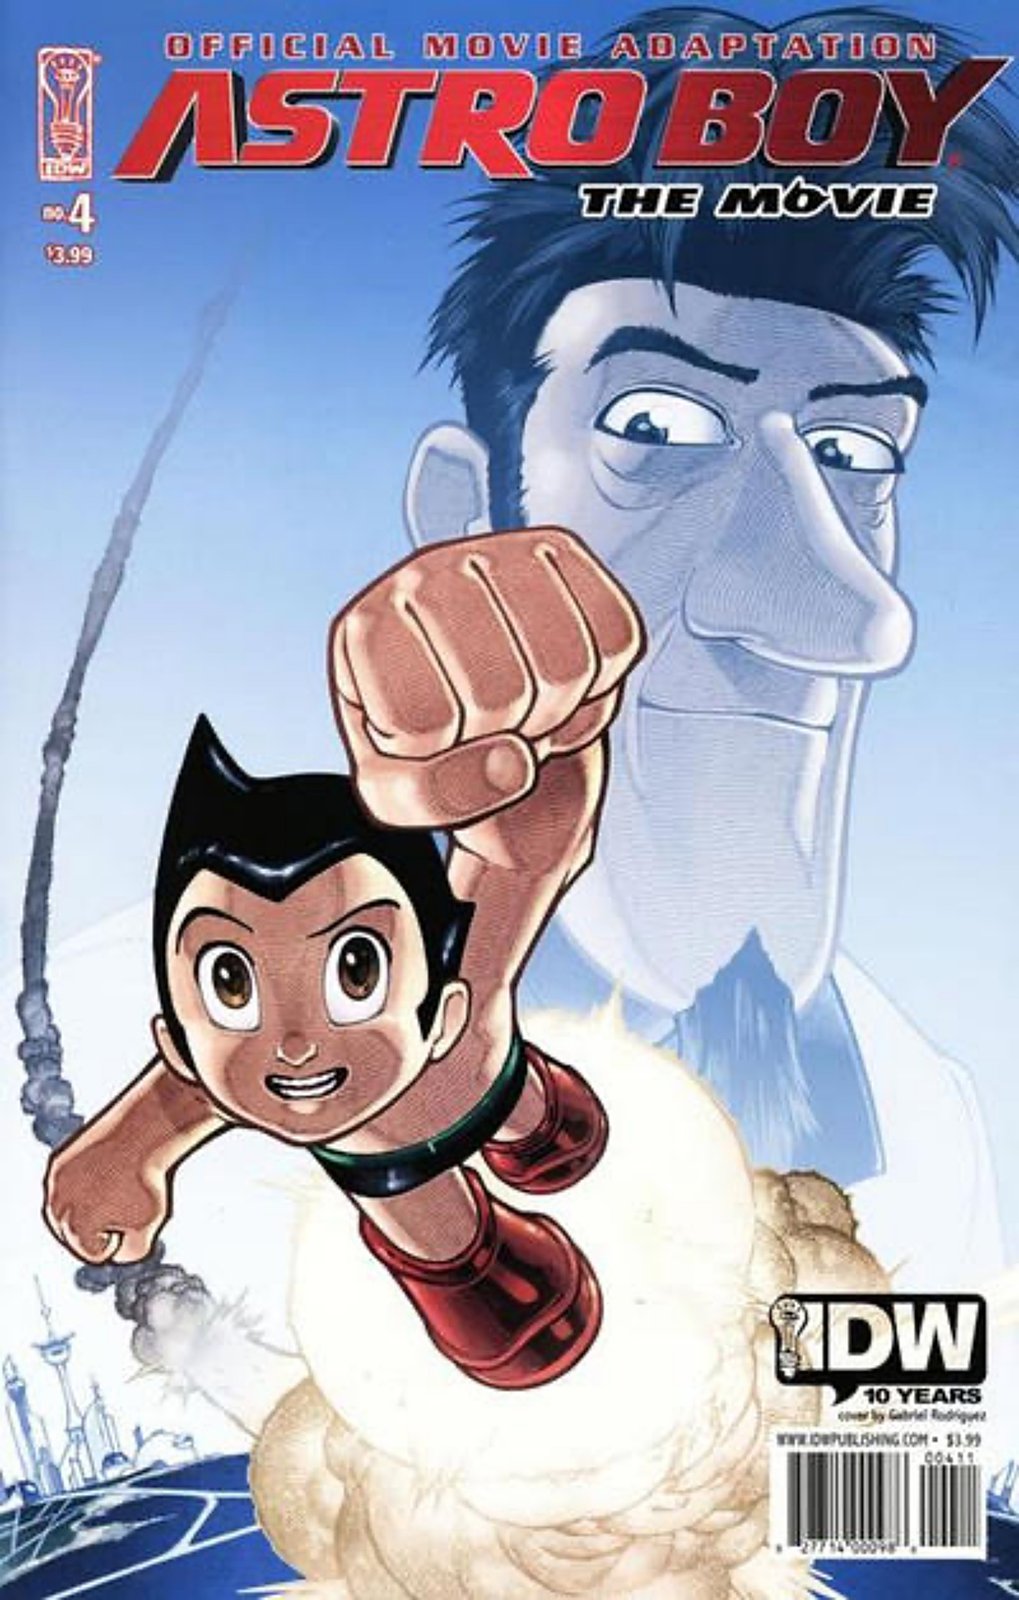 Astro Boy: The Movie: Official Movie Adaptation #4 (2009) IDW Comics